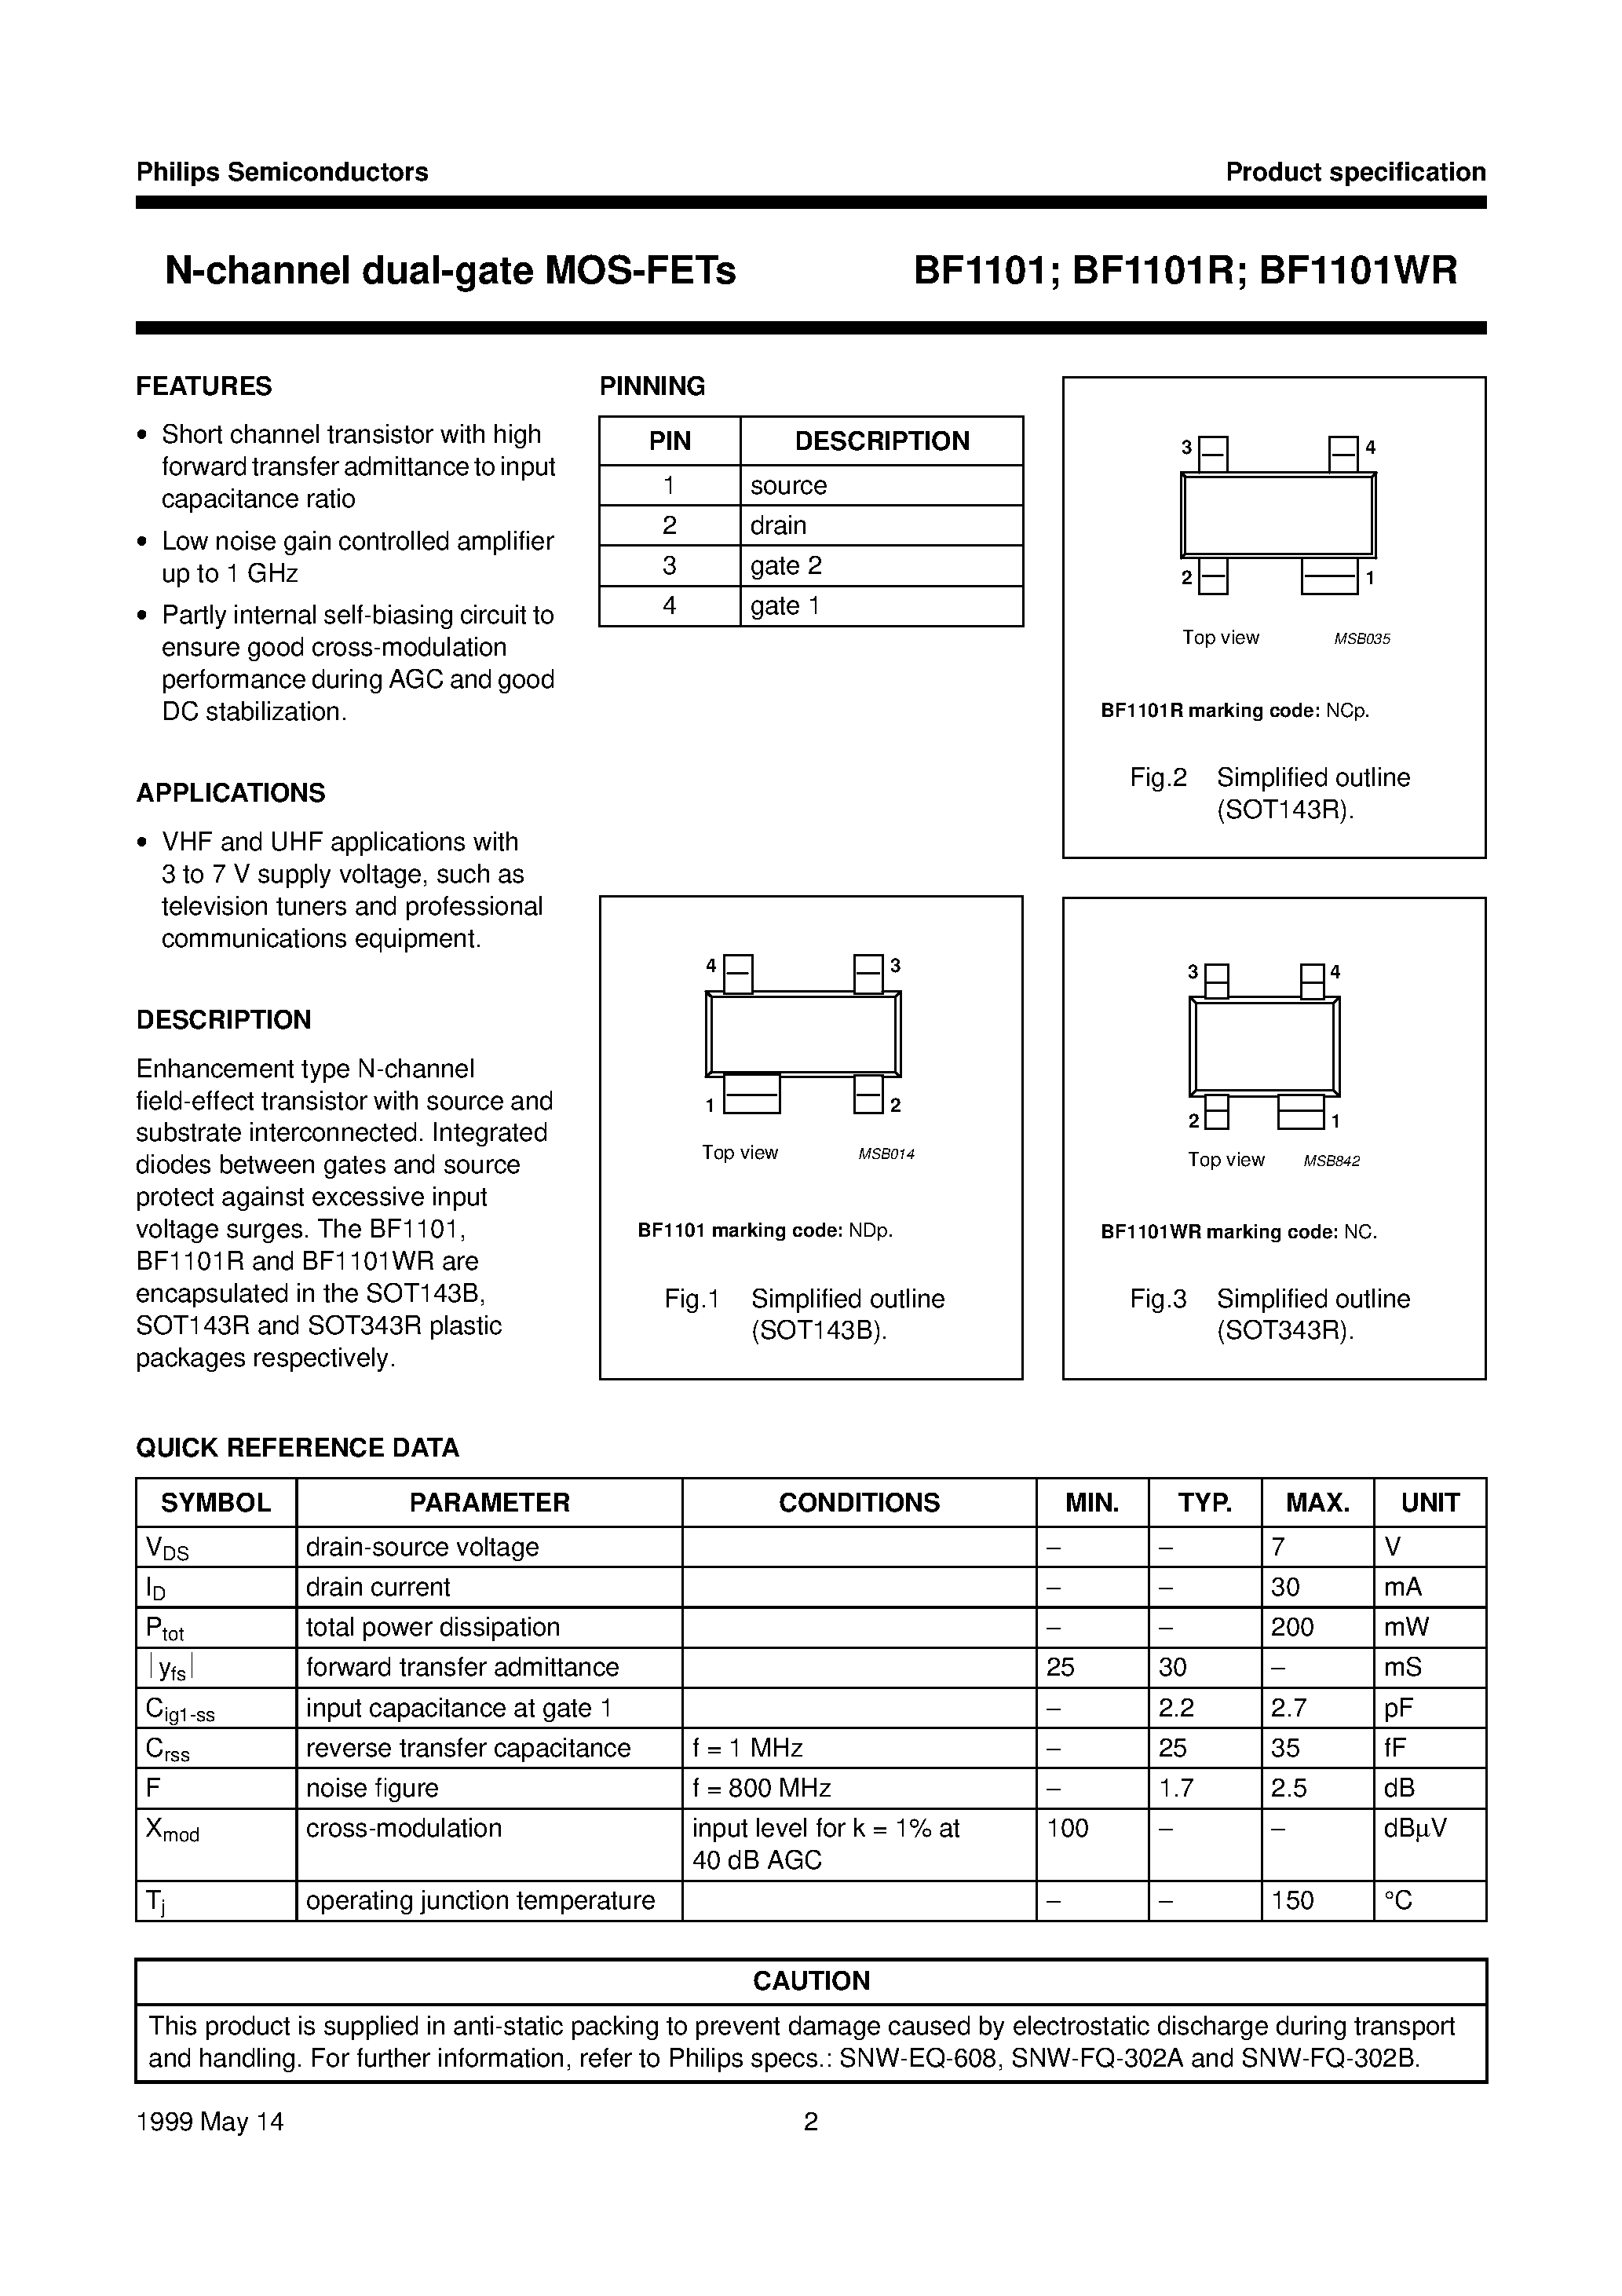 Datasheet BF1101 - N-channel dual-gate MOS-FETs page 2